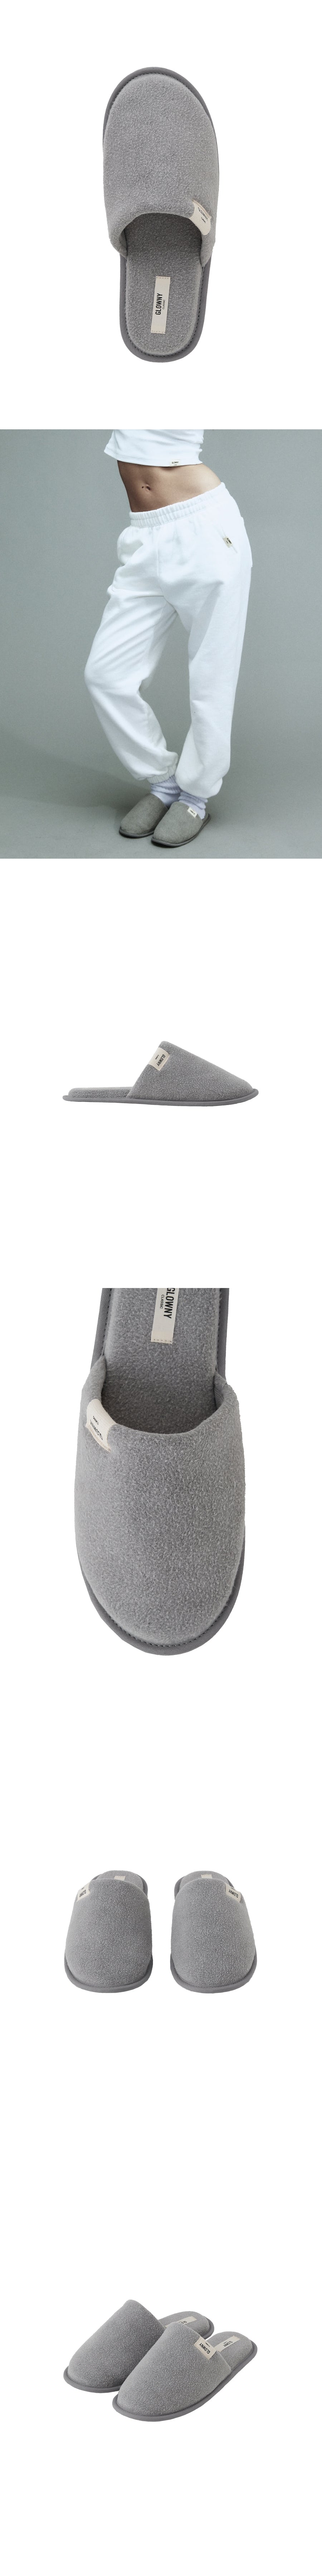 G CLASSIC SLIPPERS (GRAY)